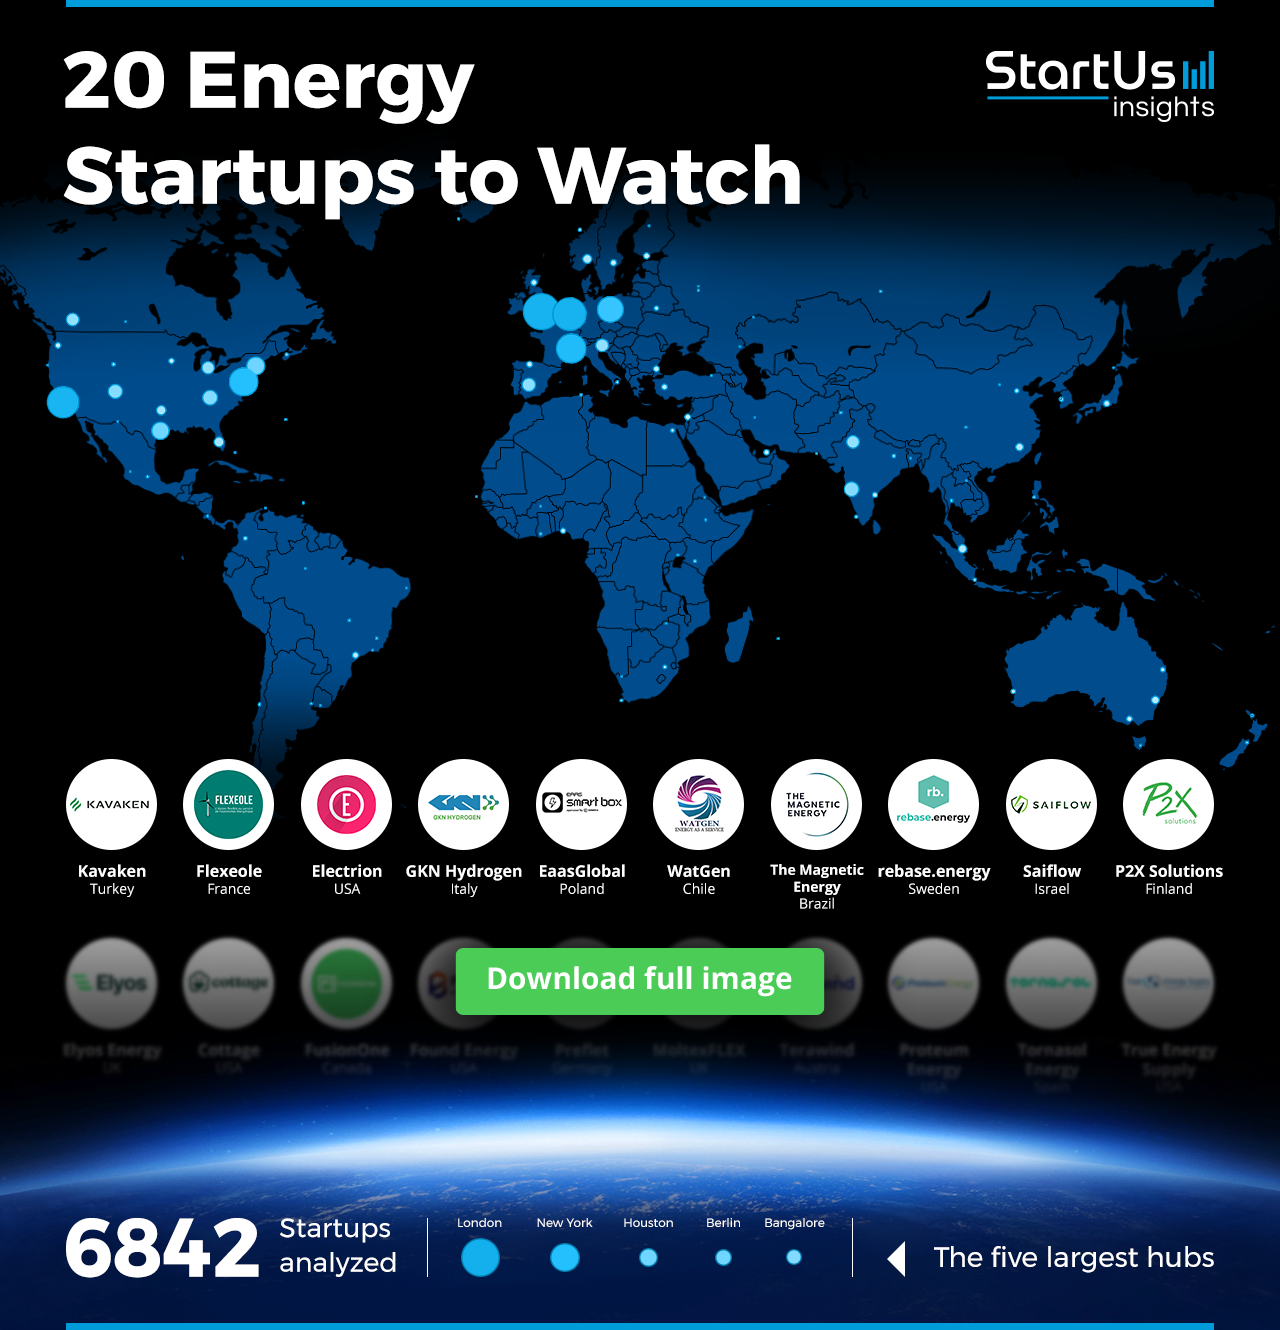 Energy-Startups-to-Watch-Heat-Map-Blurred-StartUs-Insights-noresize